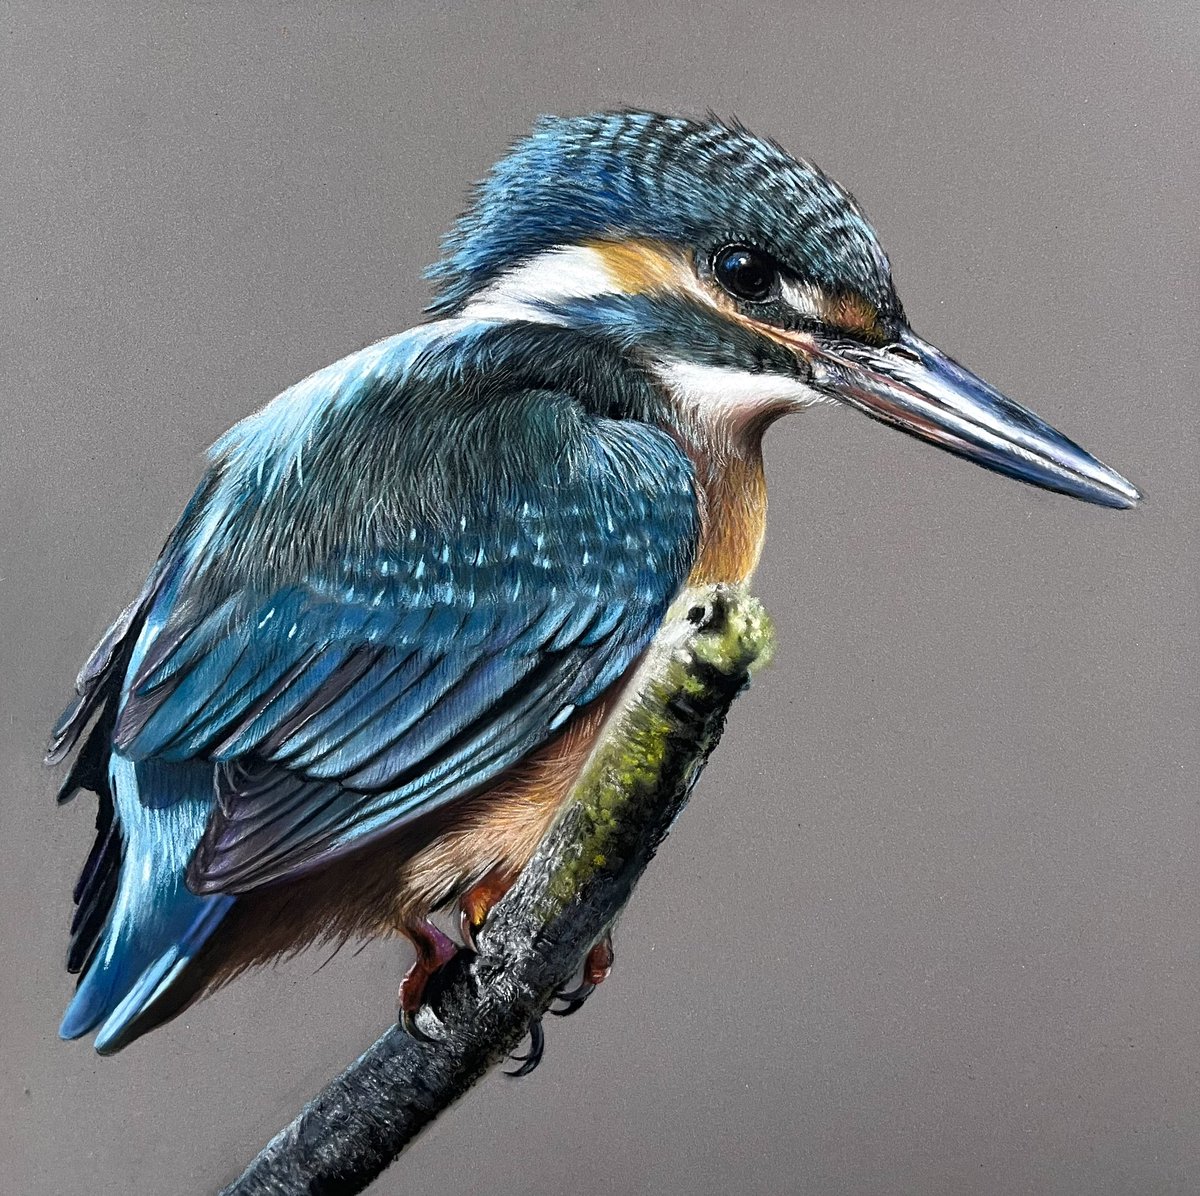 Kingfisher done! Pastel pencils and soft pastels on 10'x10' pastelmat.Hope everyones having a good weekend. 🙂
#art #artists #artist #artworks #artwork #arty #artsy #pencils #pencil #softpastel #pastel #colours #colourfulart #colourfulartwork #kingfisher #birdart #realismartist